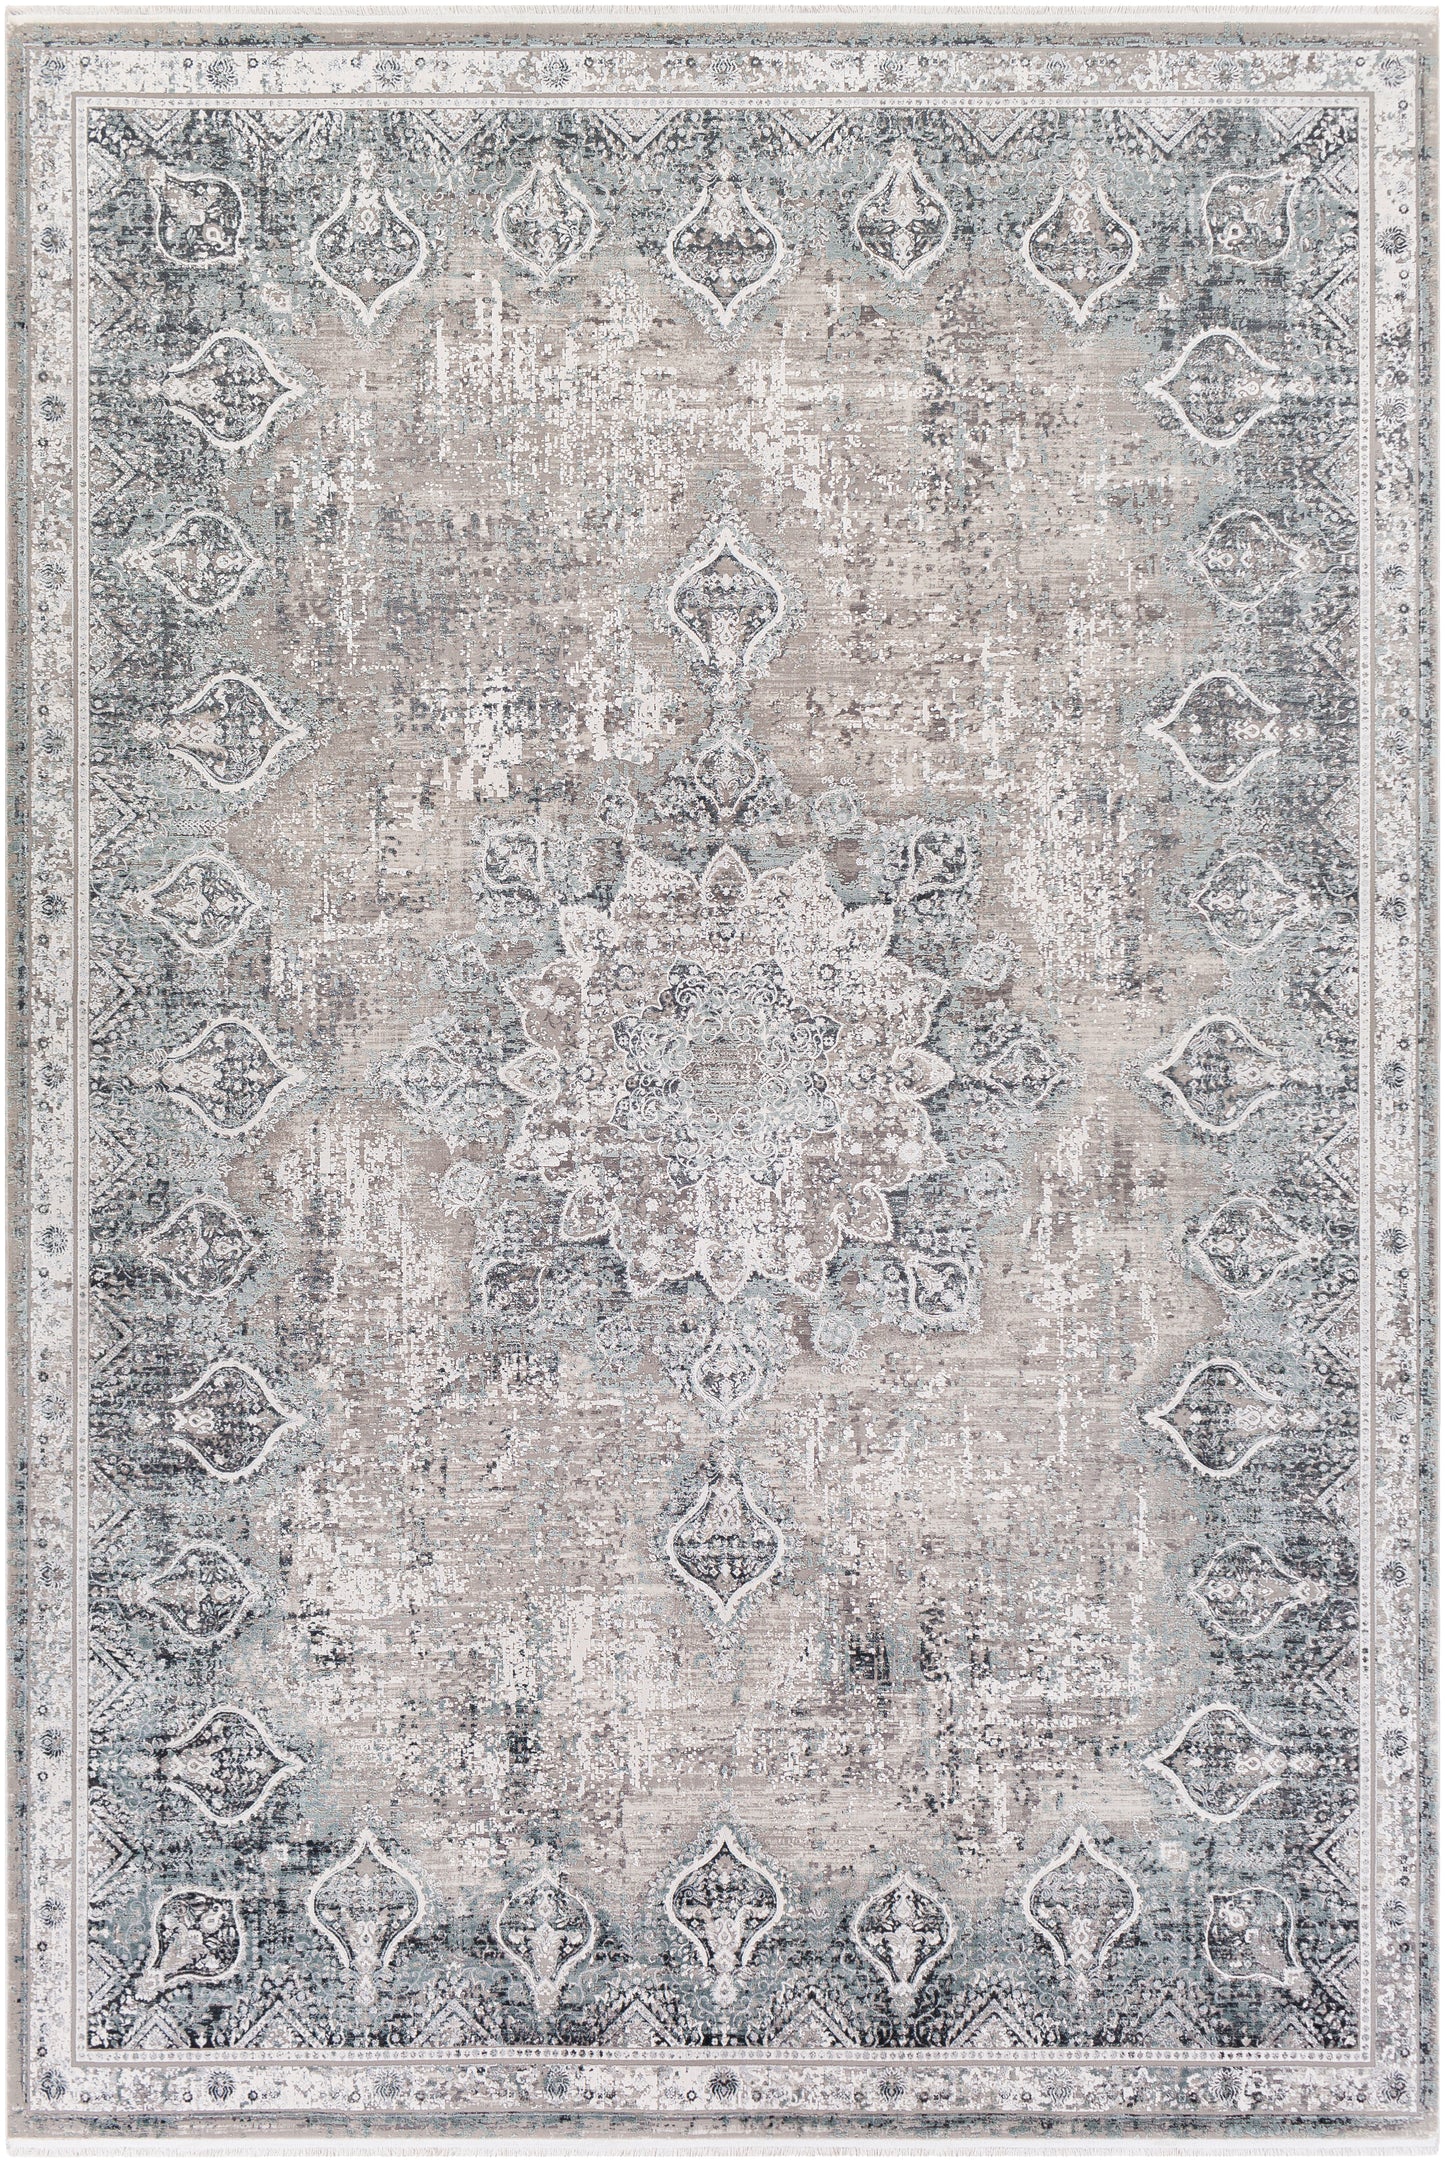 Solar 26137 Machine Woven Synthetic Blend Indoor Area Rug by Surya Rugs